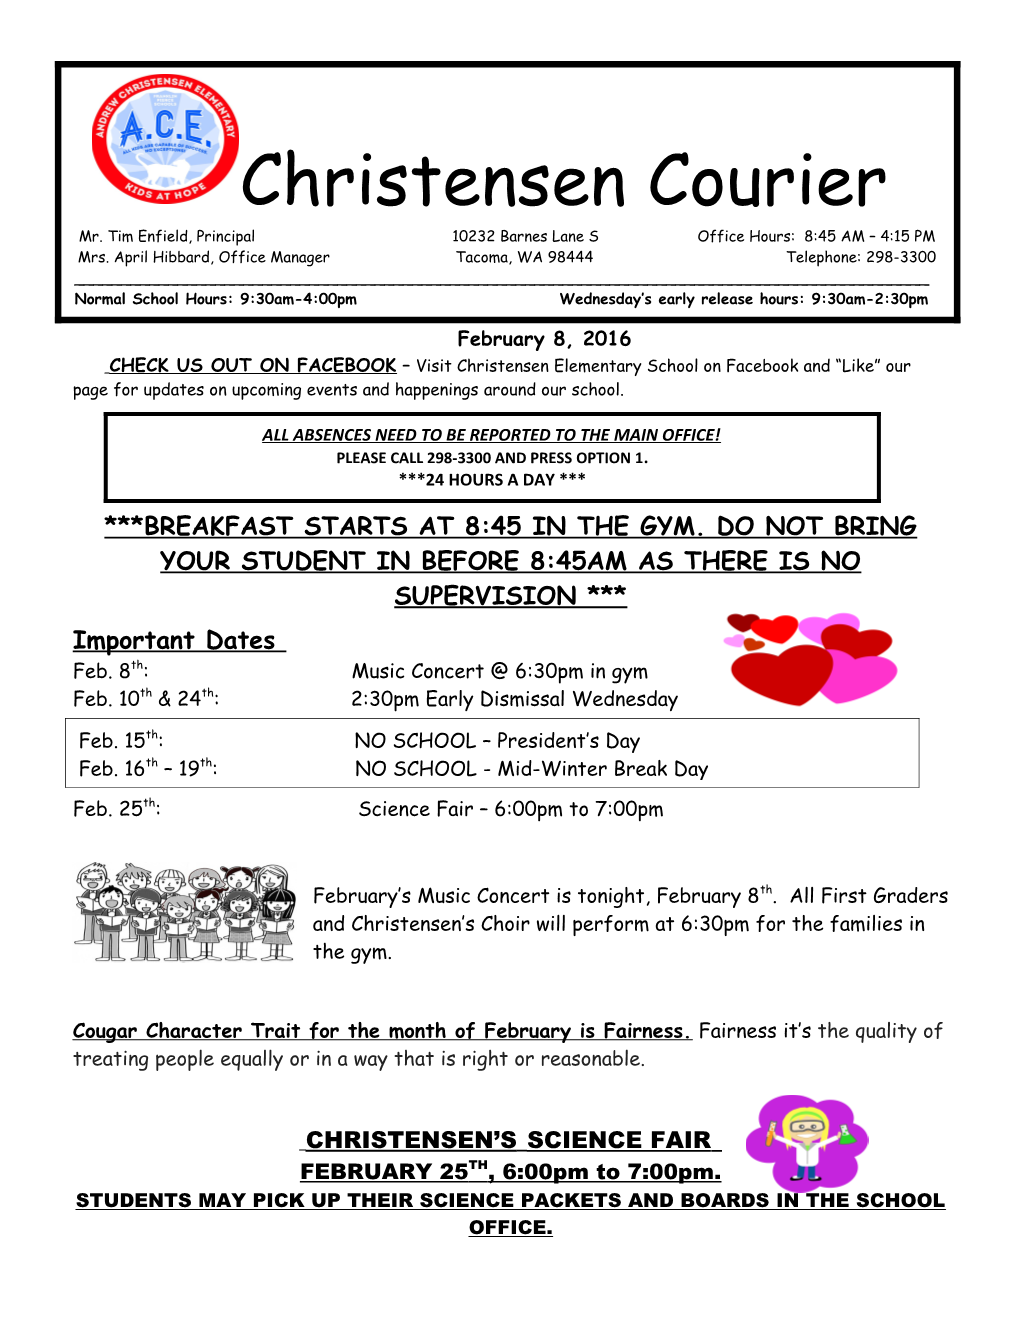 CHECK US out on FACEBOOK Visit Christensen Elementary School on Facebook and Like Our